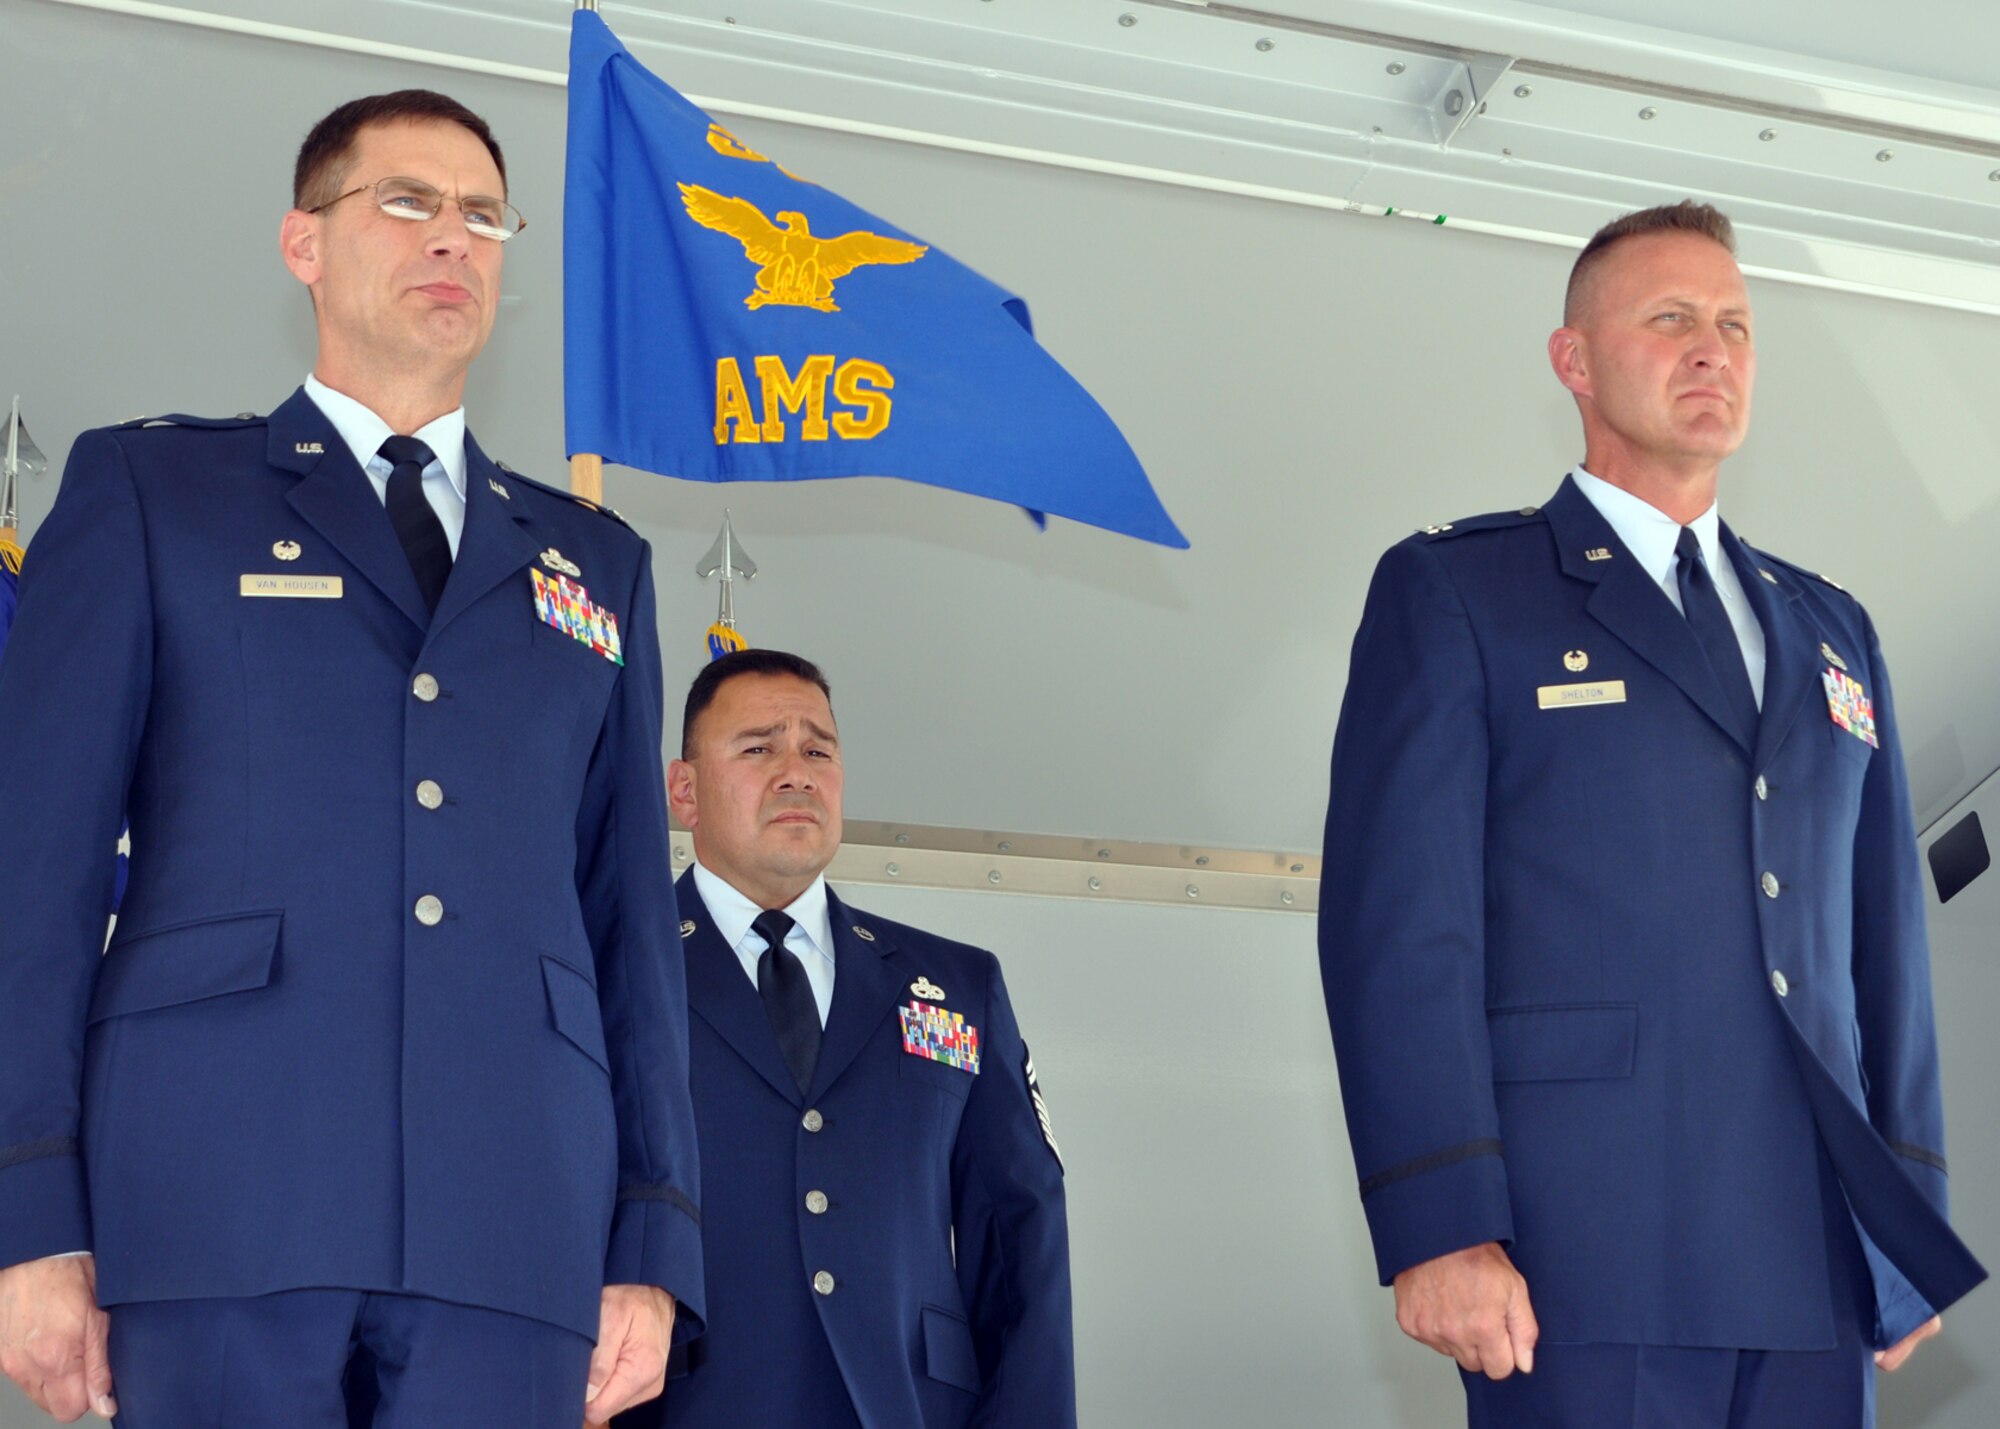 Col. James Van Housen, 302nd Maintenance Group commander (left) prepares to take the guidon from Senior Master Sgt. Robert Pacheco (background) and offer it to Capt. Collin "Bo" Shelton, who assumed command of the 302nd Aircraft Maintenance Squadron during a July 11 ceremony at Peterson Air Force Base, Colo. "I hold our people to the highest standards, including myself," said Captain Shelton after taking command. "We want to be the standard everyone else measures up to." Sergeant Pacheco is the 302nd MXG first sergeant. (U.S. Air Force photo/Tech. Sgt. Daniel Butterfield)